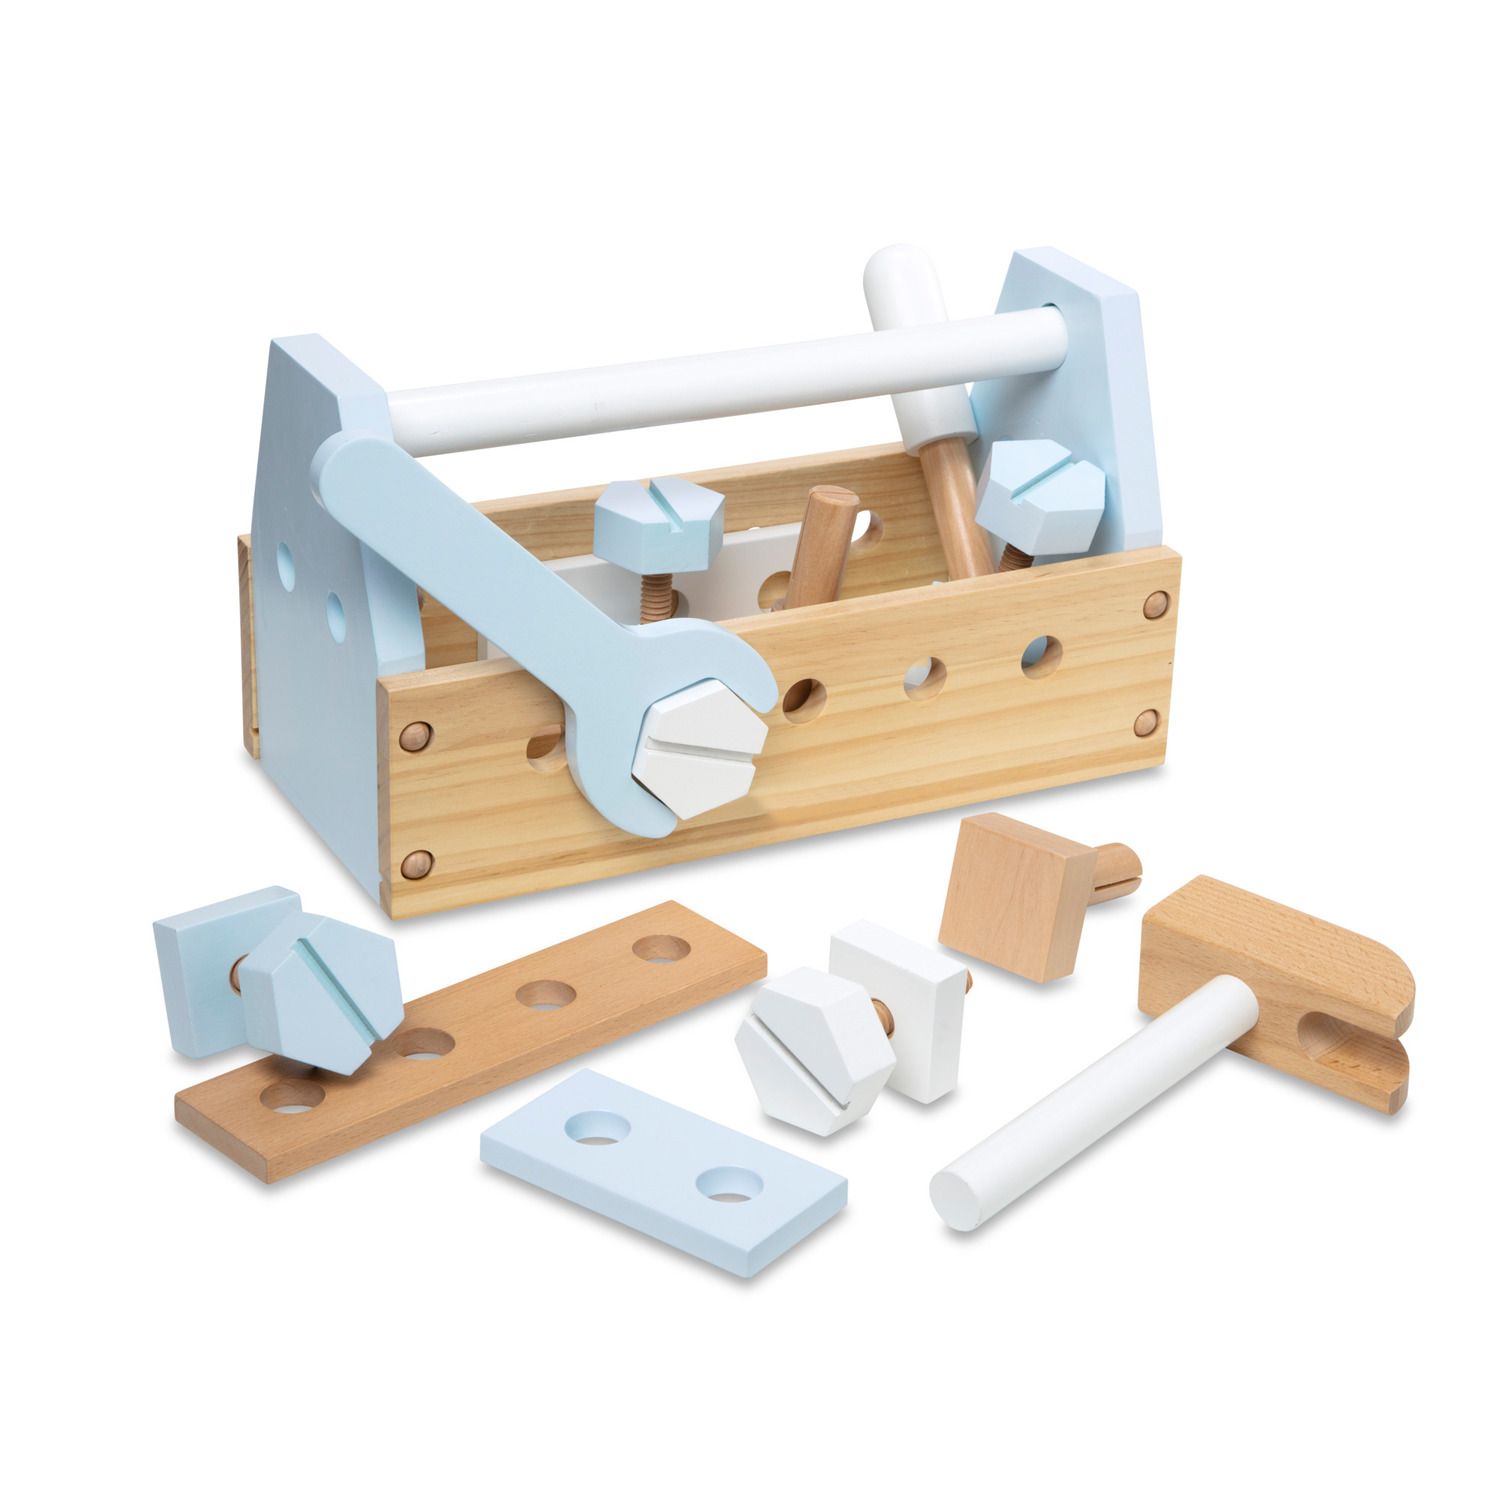 wooden tool kit toy